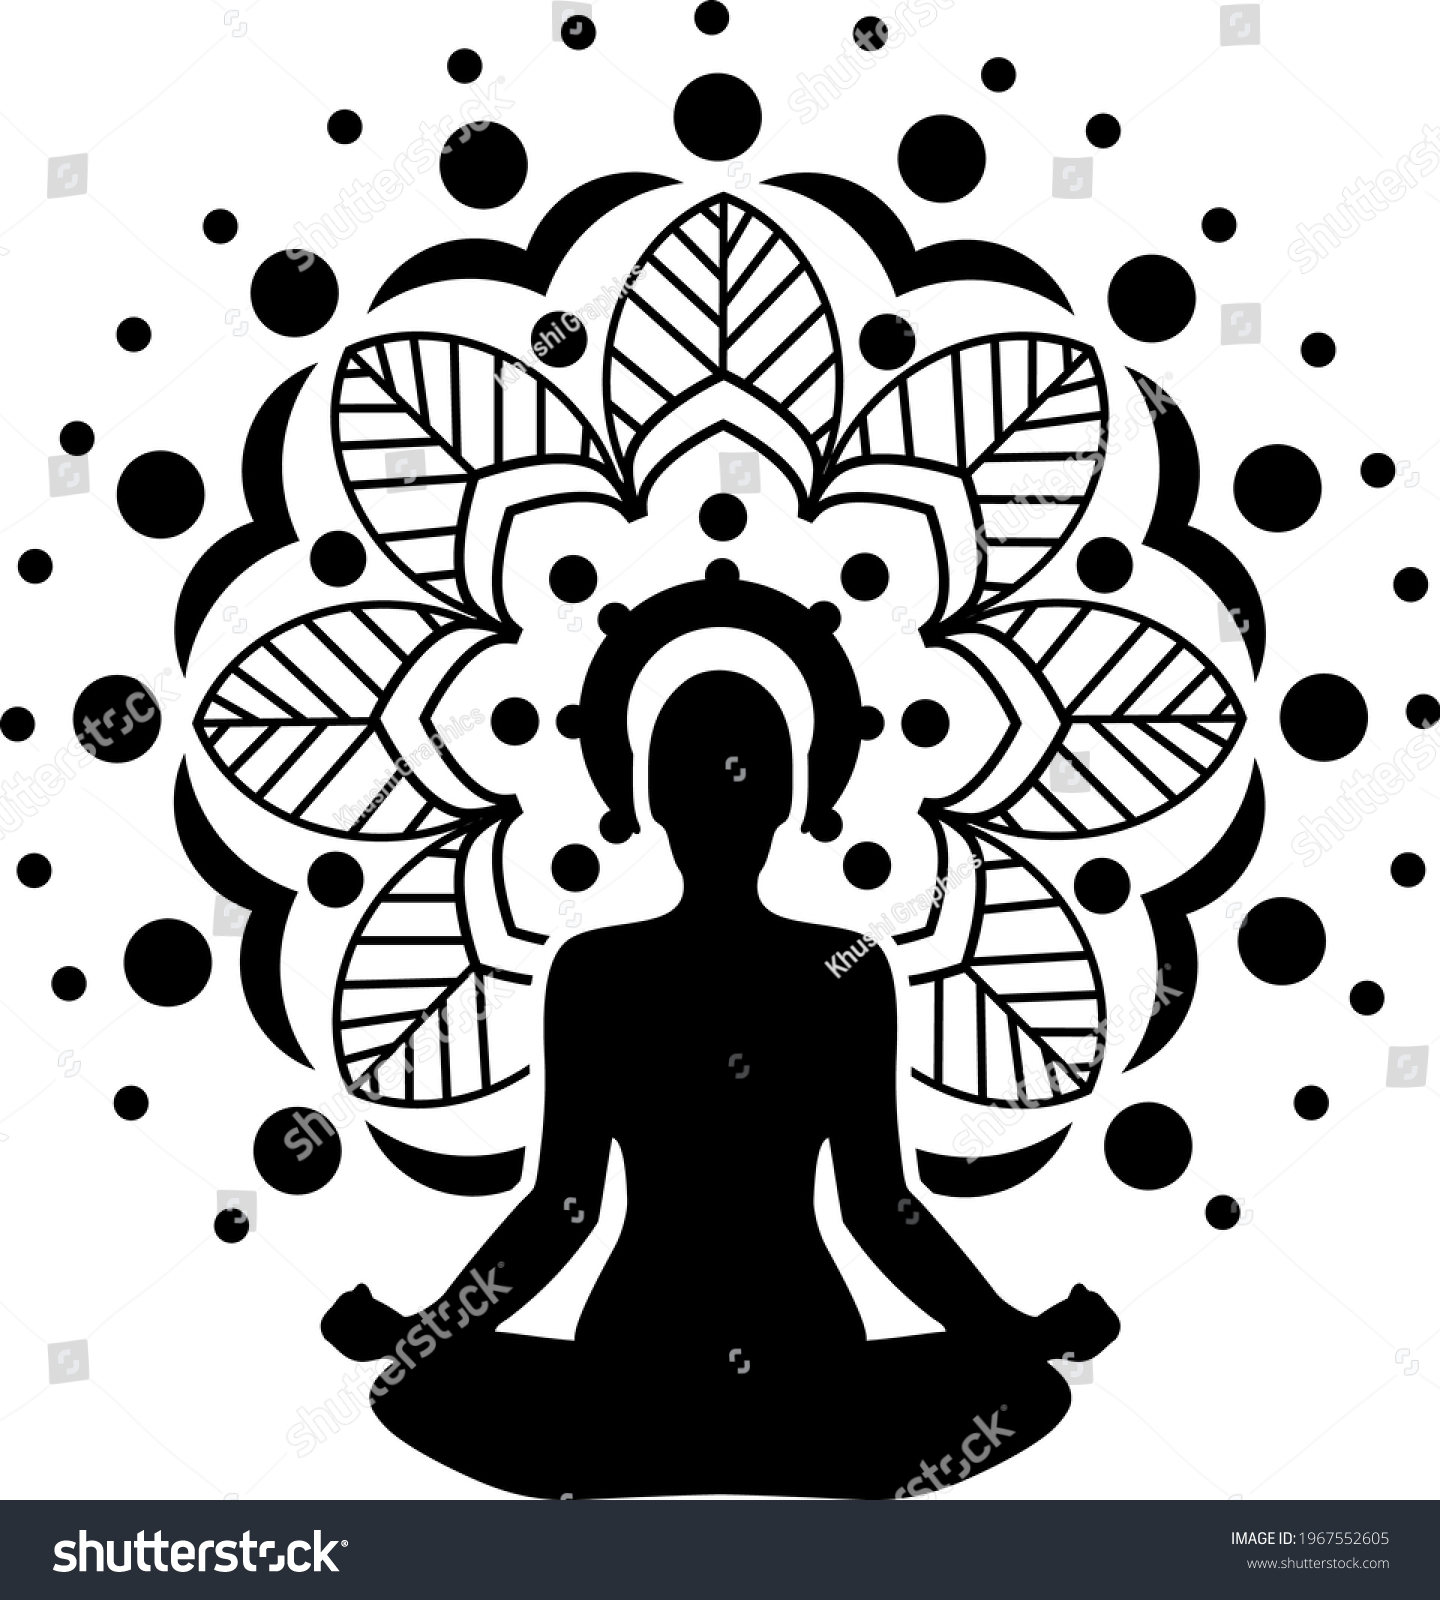 SVG of Unique and creative design yoga padmasana pose in the middle of an abstract lotus flower for all the yoga lovers. svg